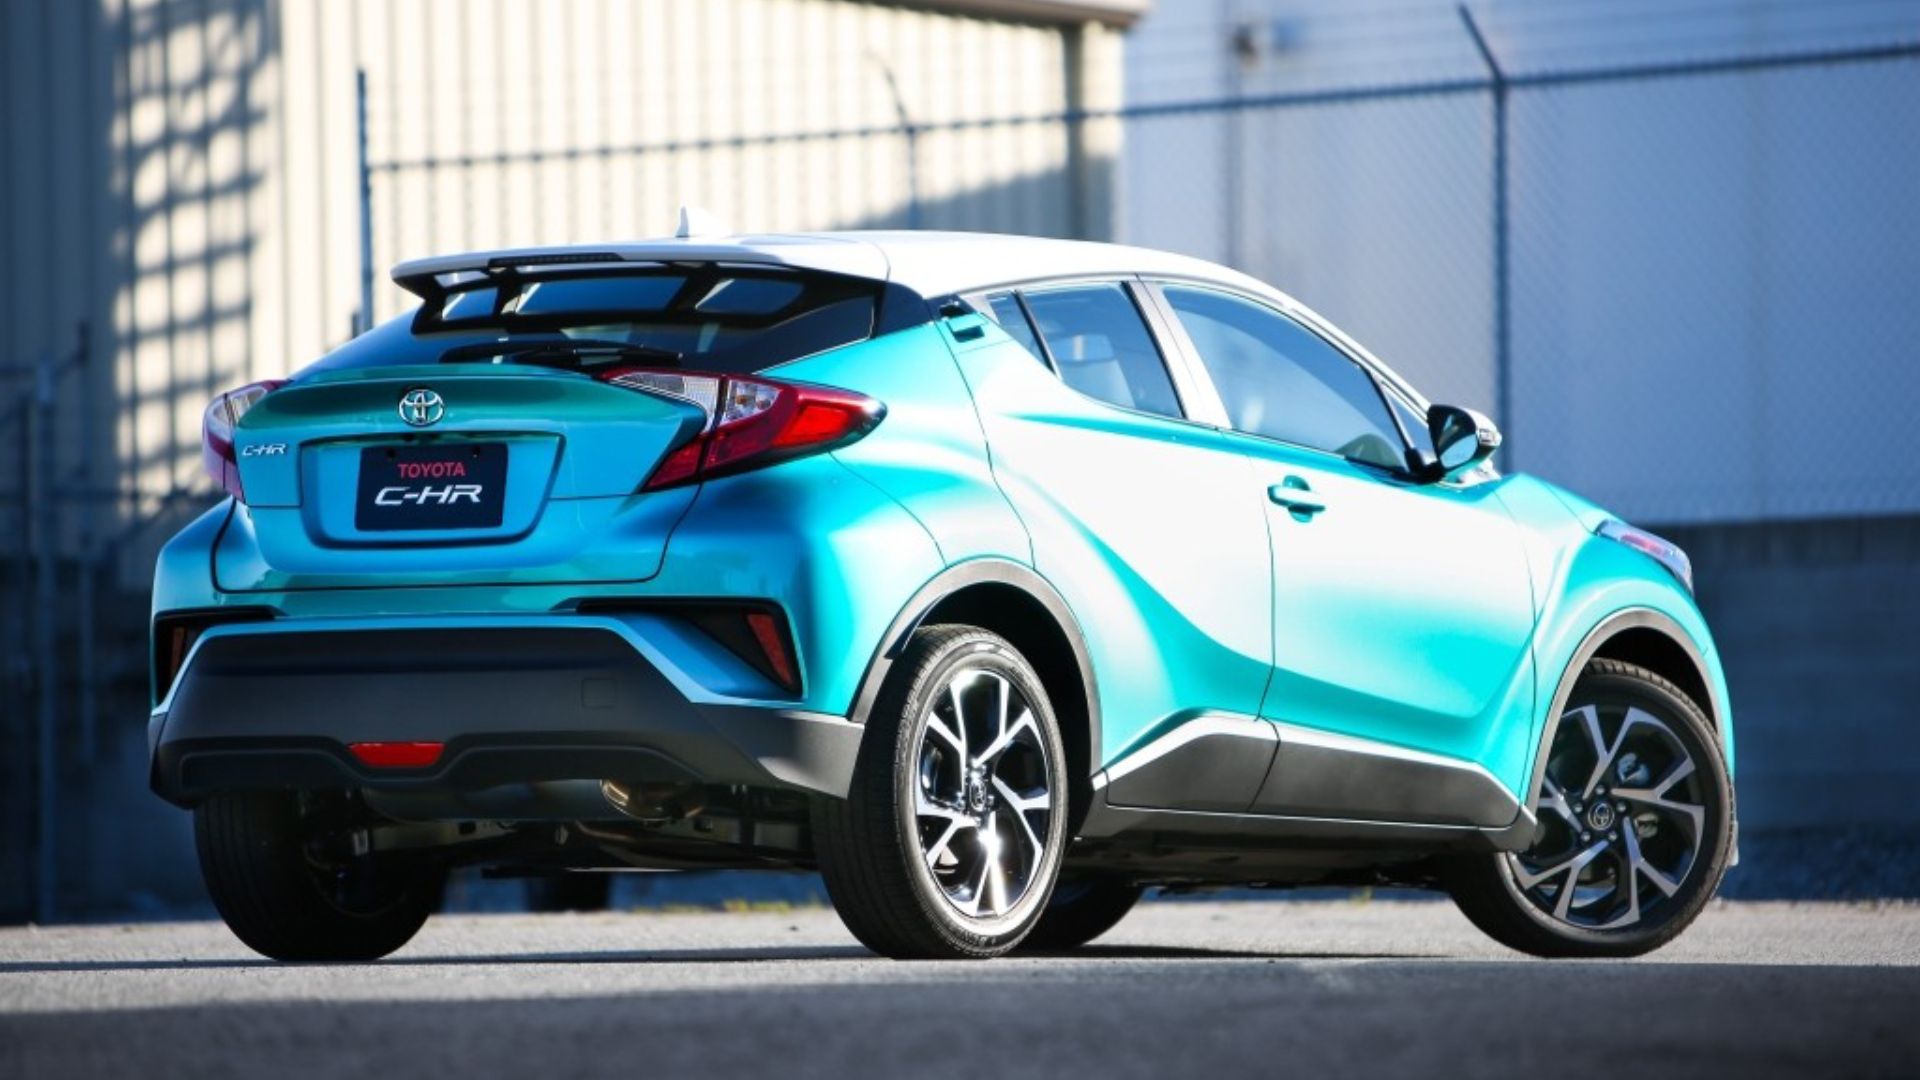 2019 Toyota C-HR introduced in Malaysia – new colour option, updated styling and equipment list ...